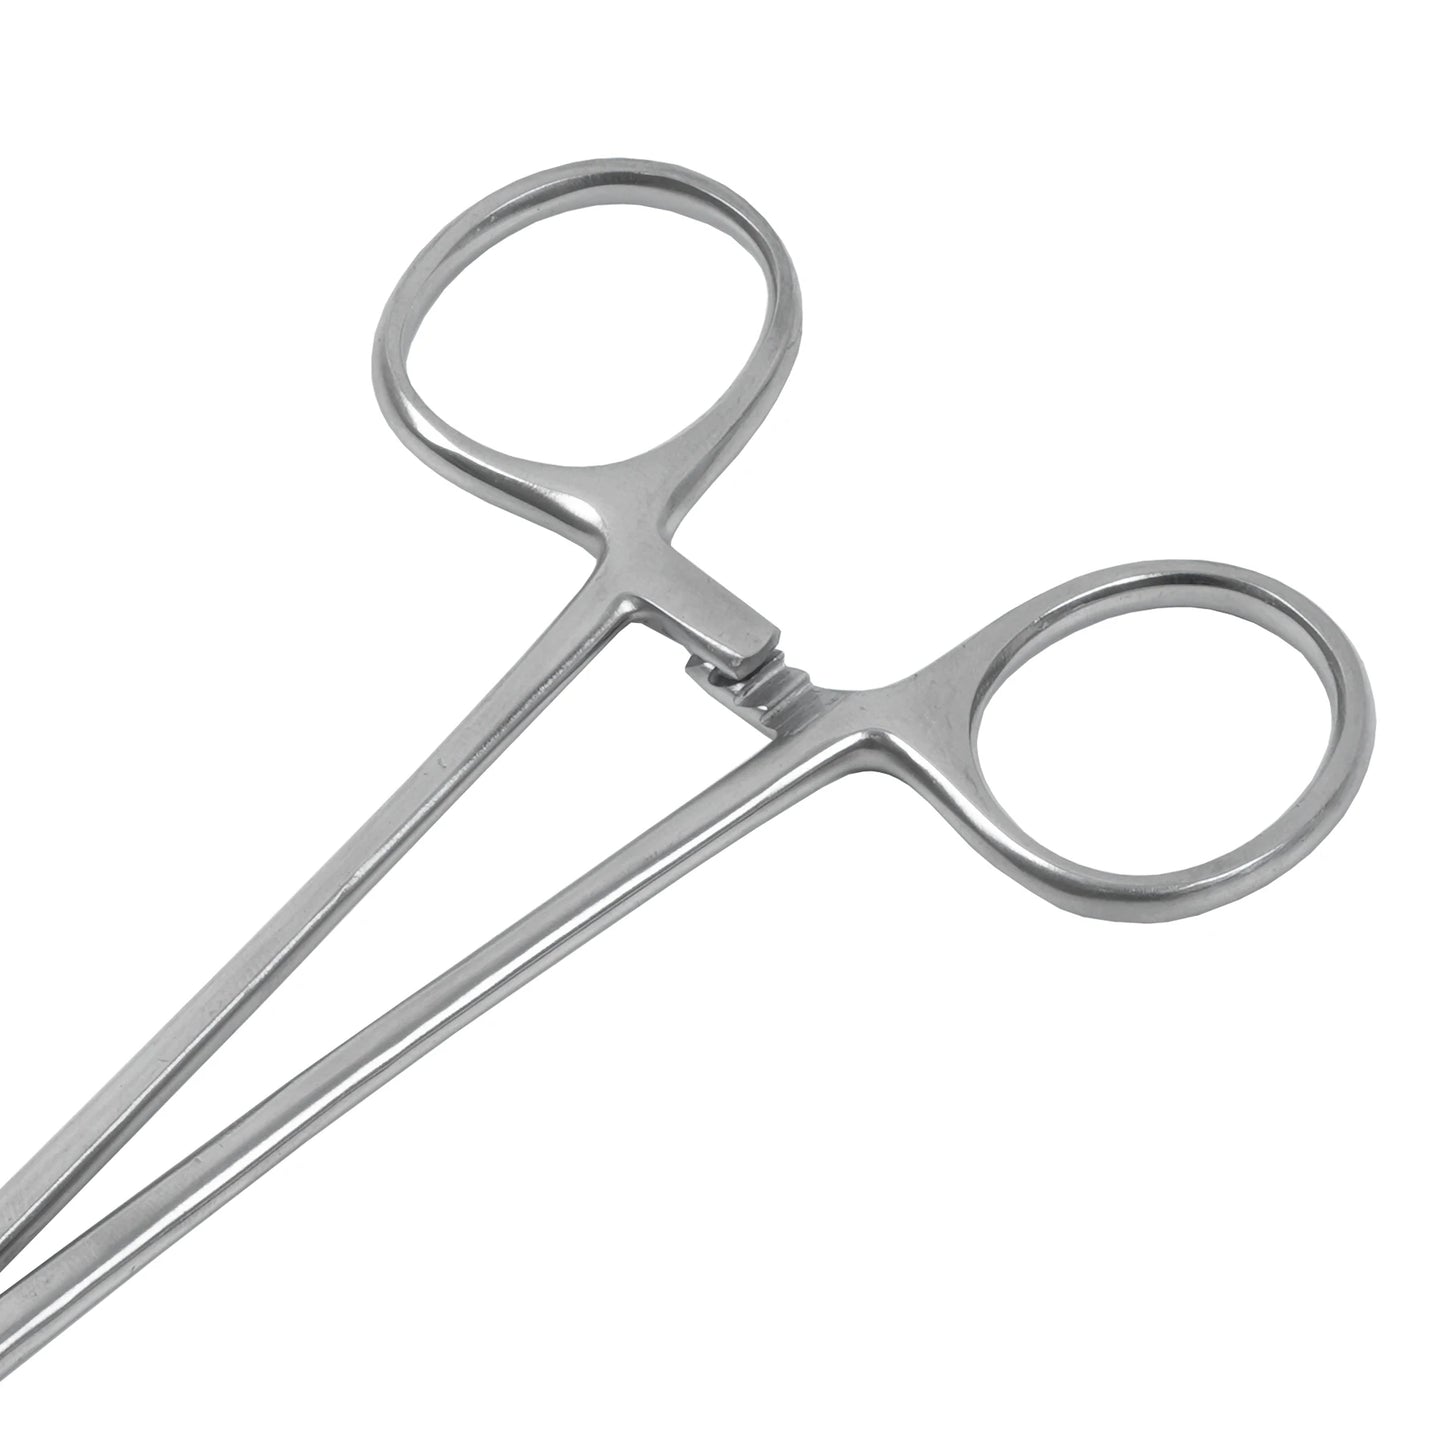 1PC Dentistry Surgical TC Head Needle Holder Pliers Forceps